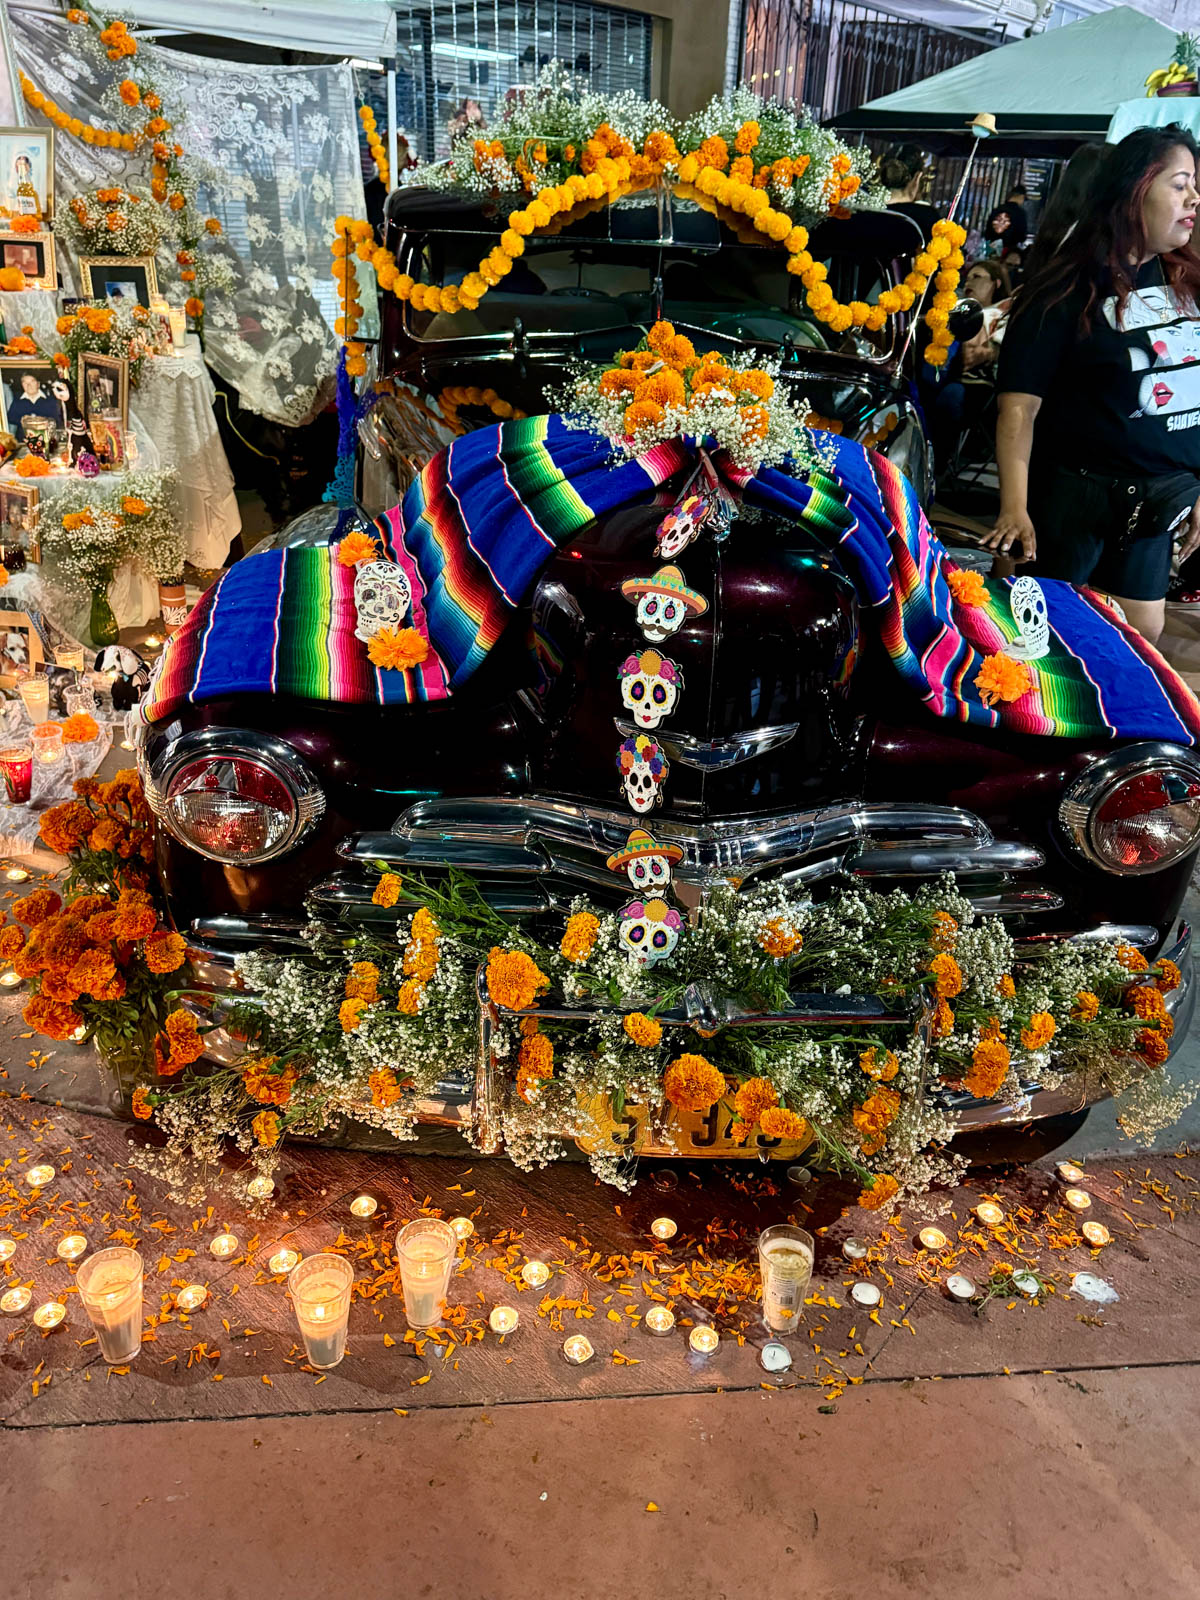 Car decorated for Day of the Dead Celebration.